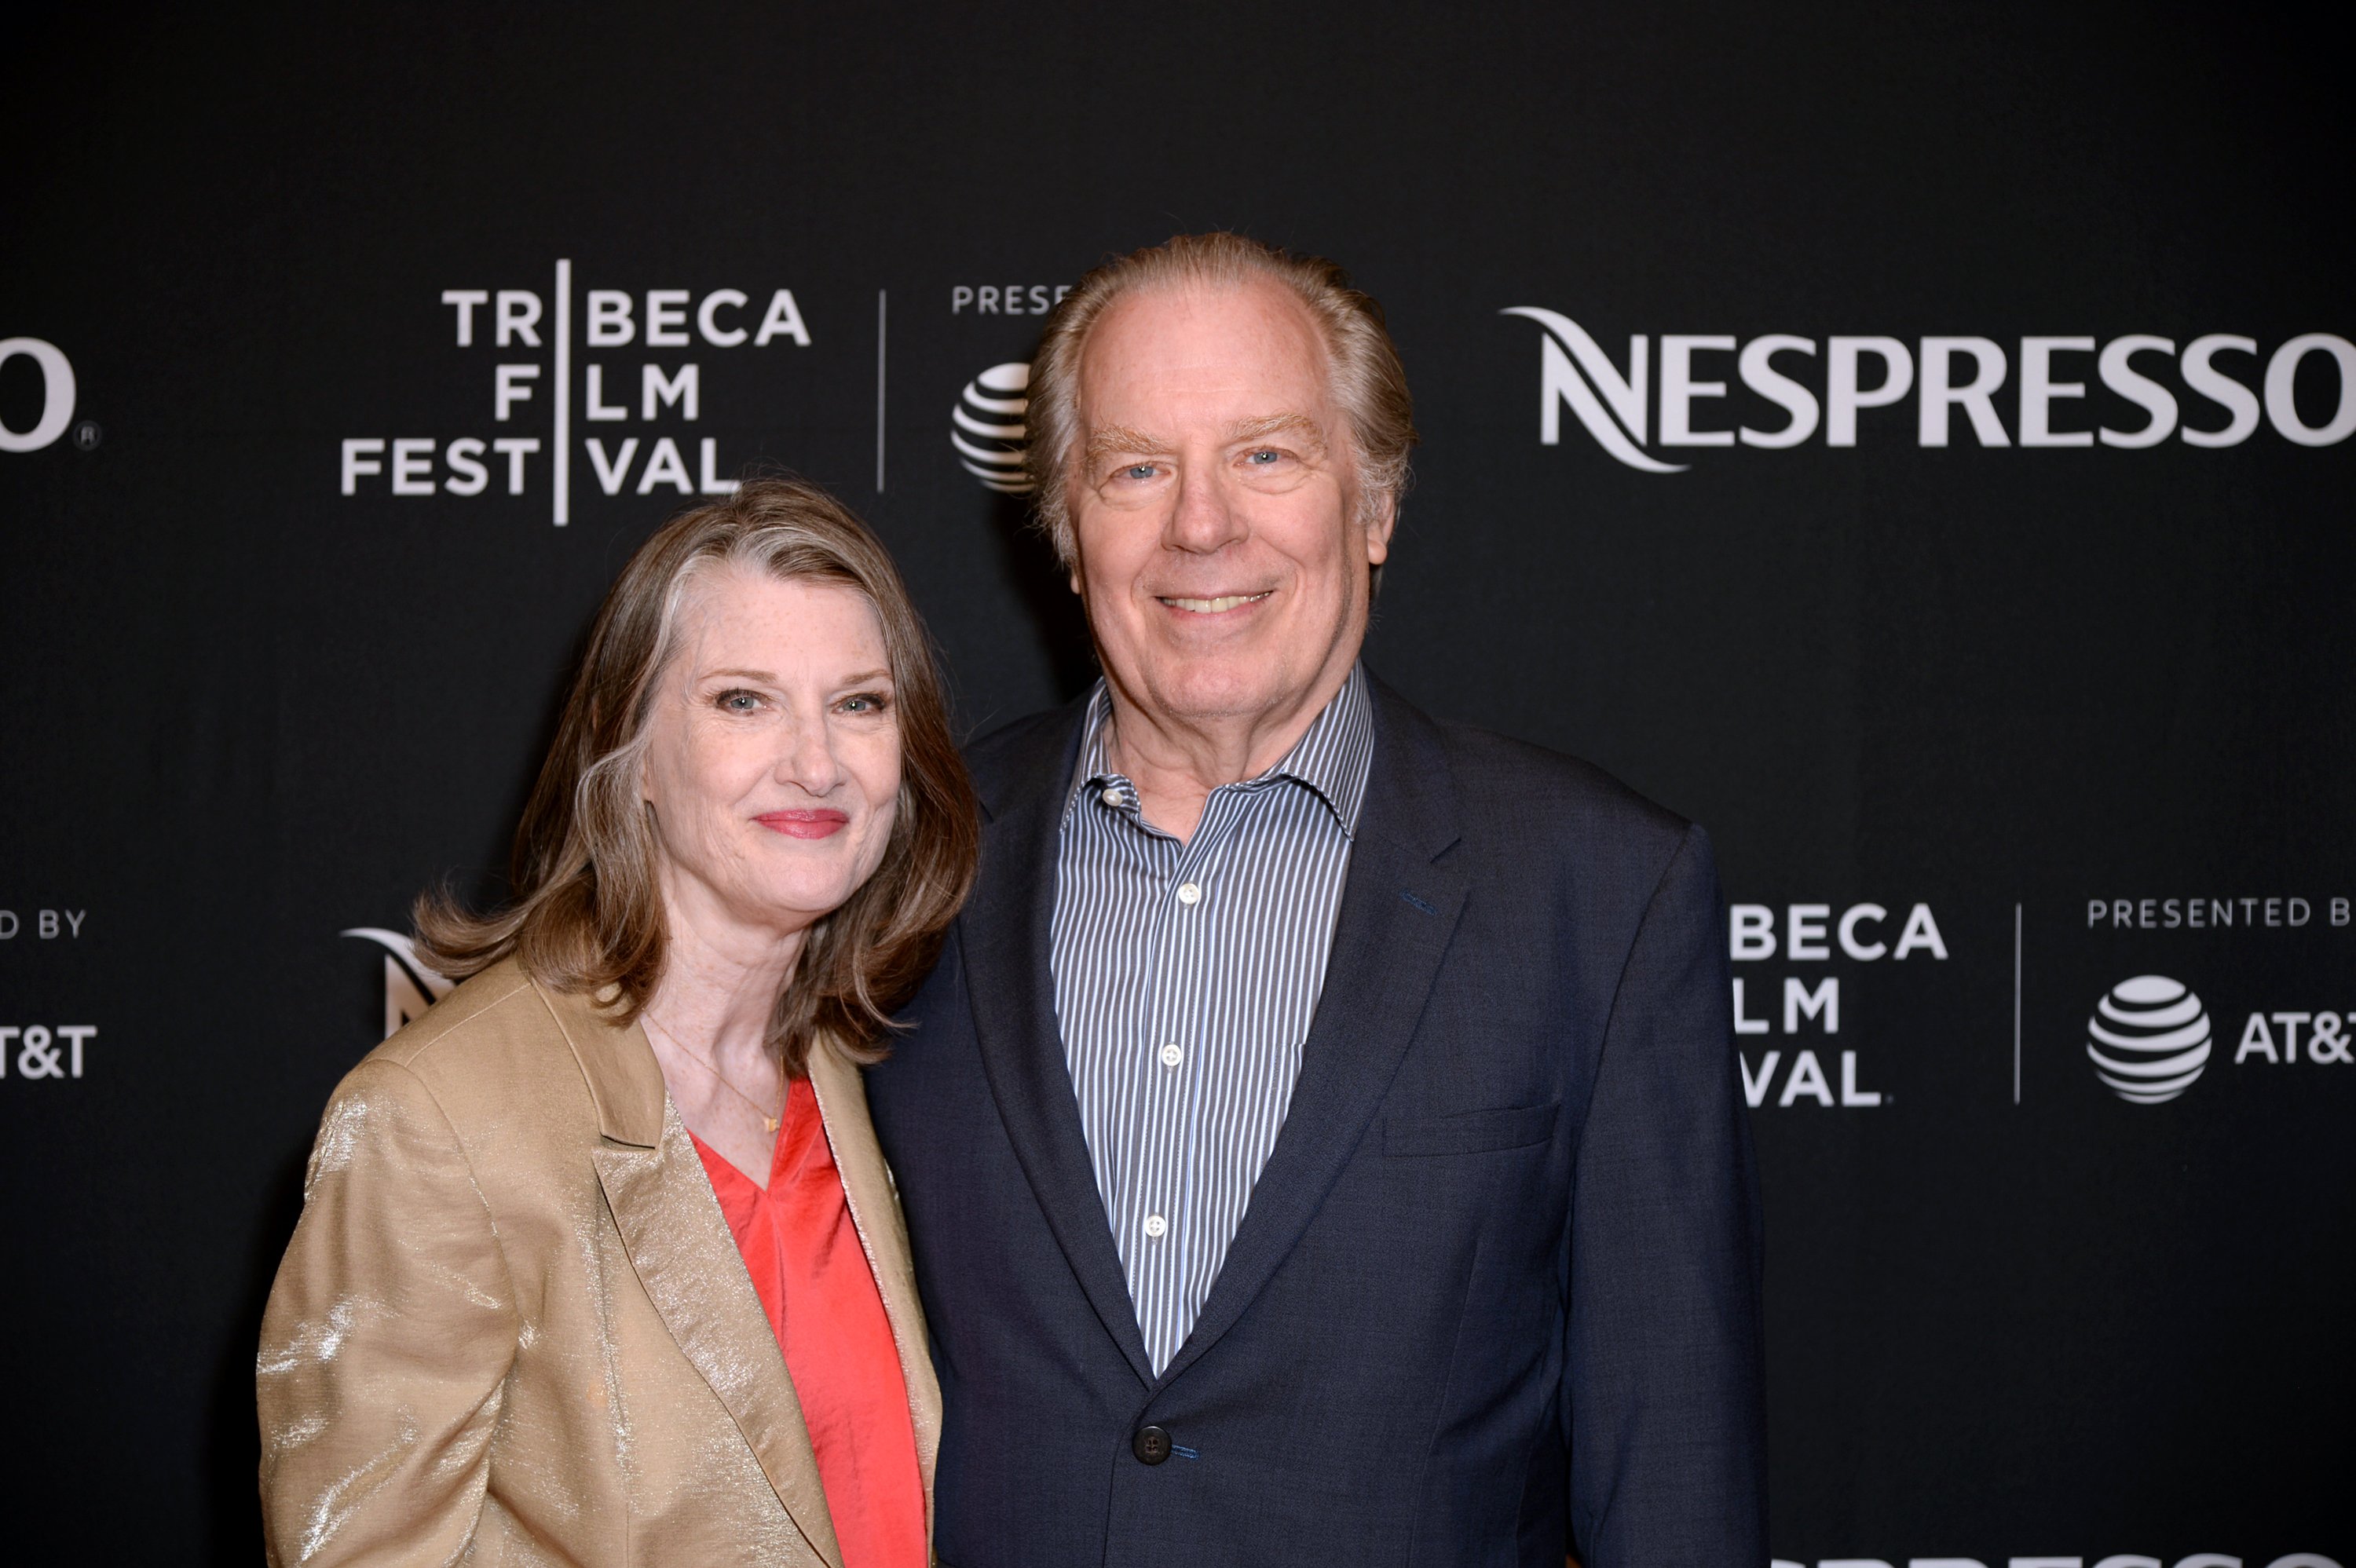 Actress Annette O'Toole and Actor Michael McKean on March 20 2019 in Beverly Hills, California | Source: Getty Images